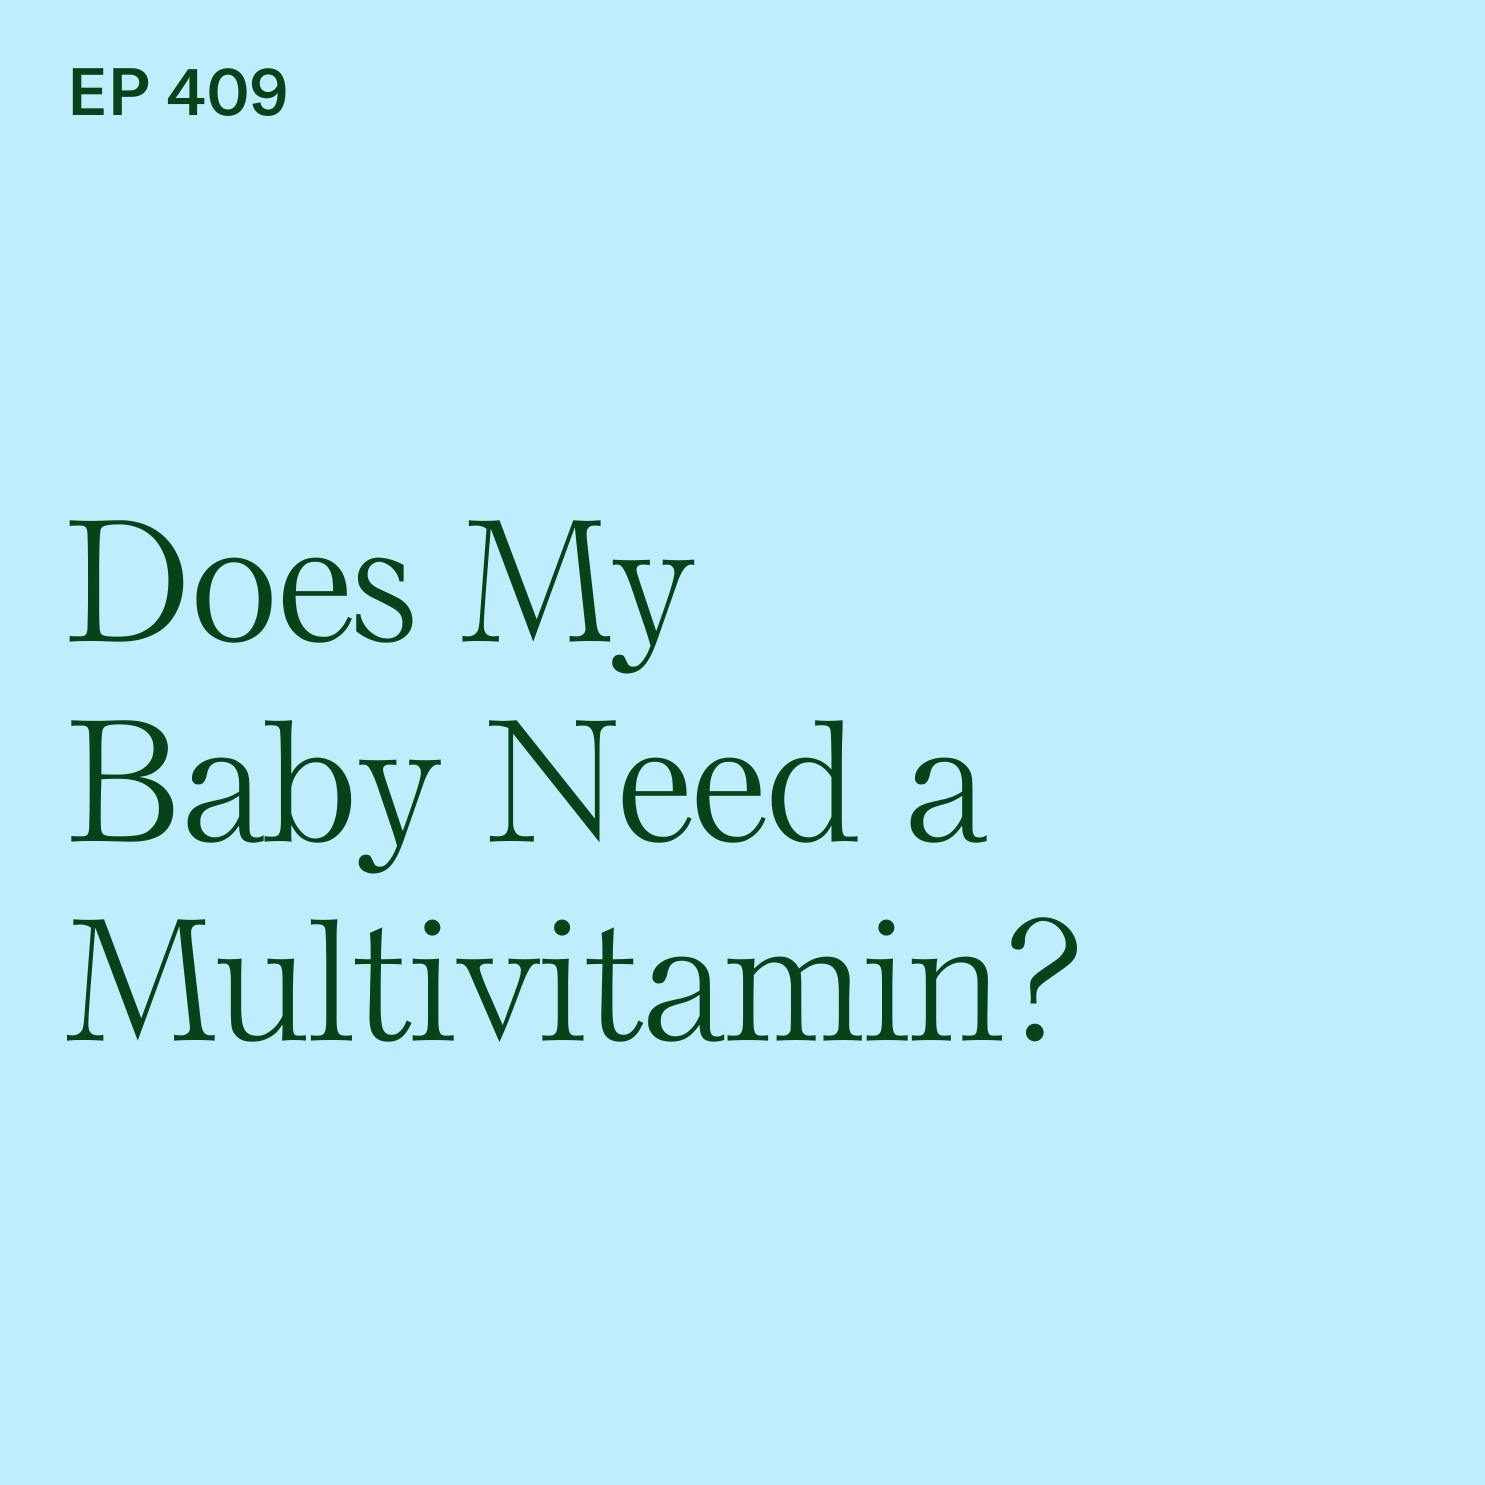 Does My Baby Need a Multivitamin?